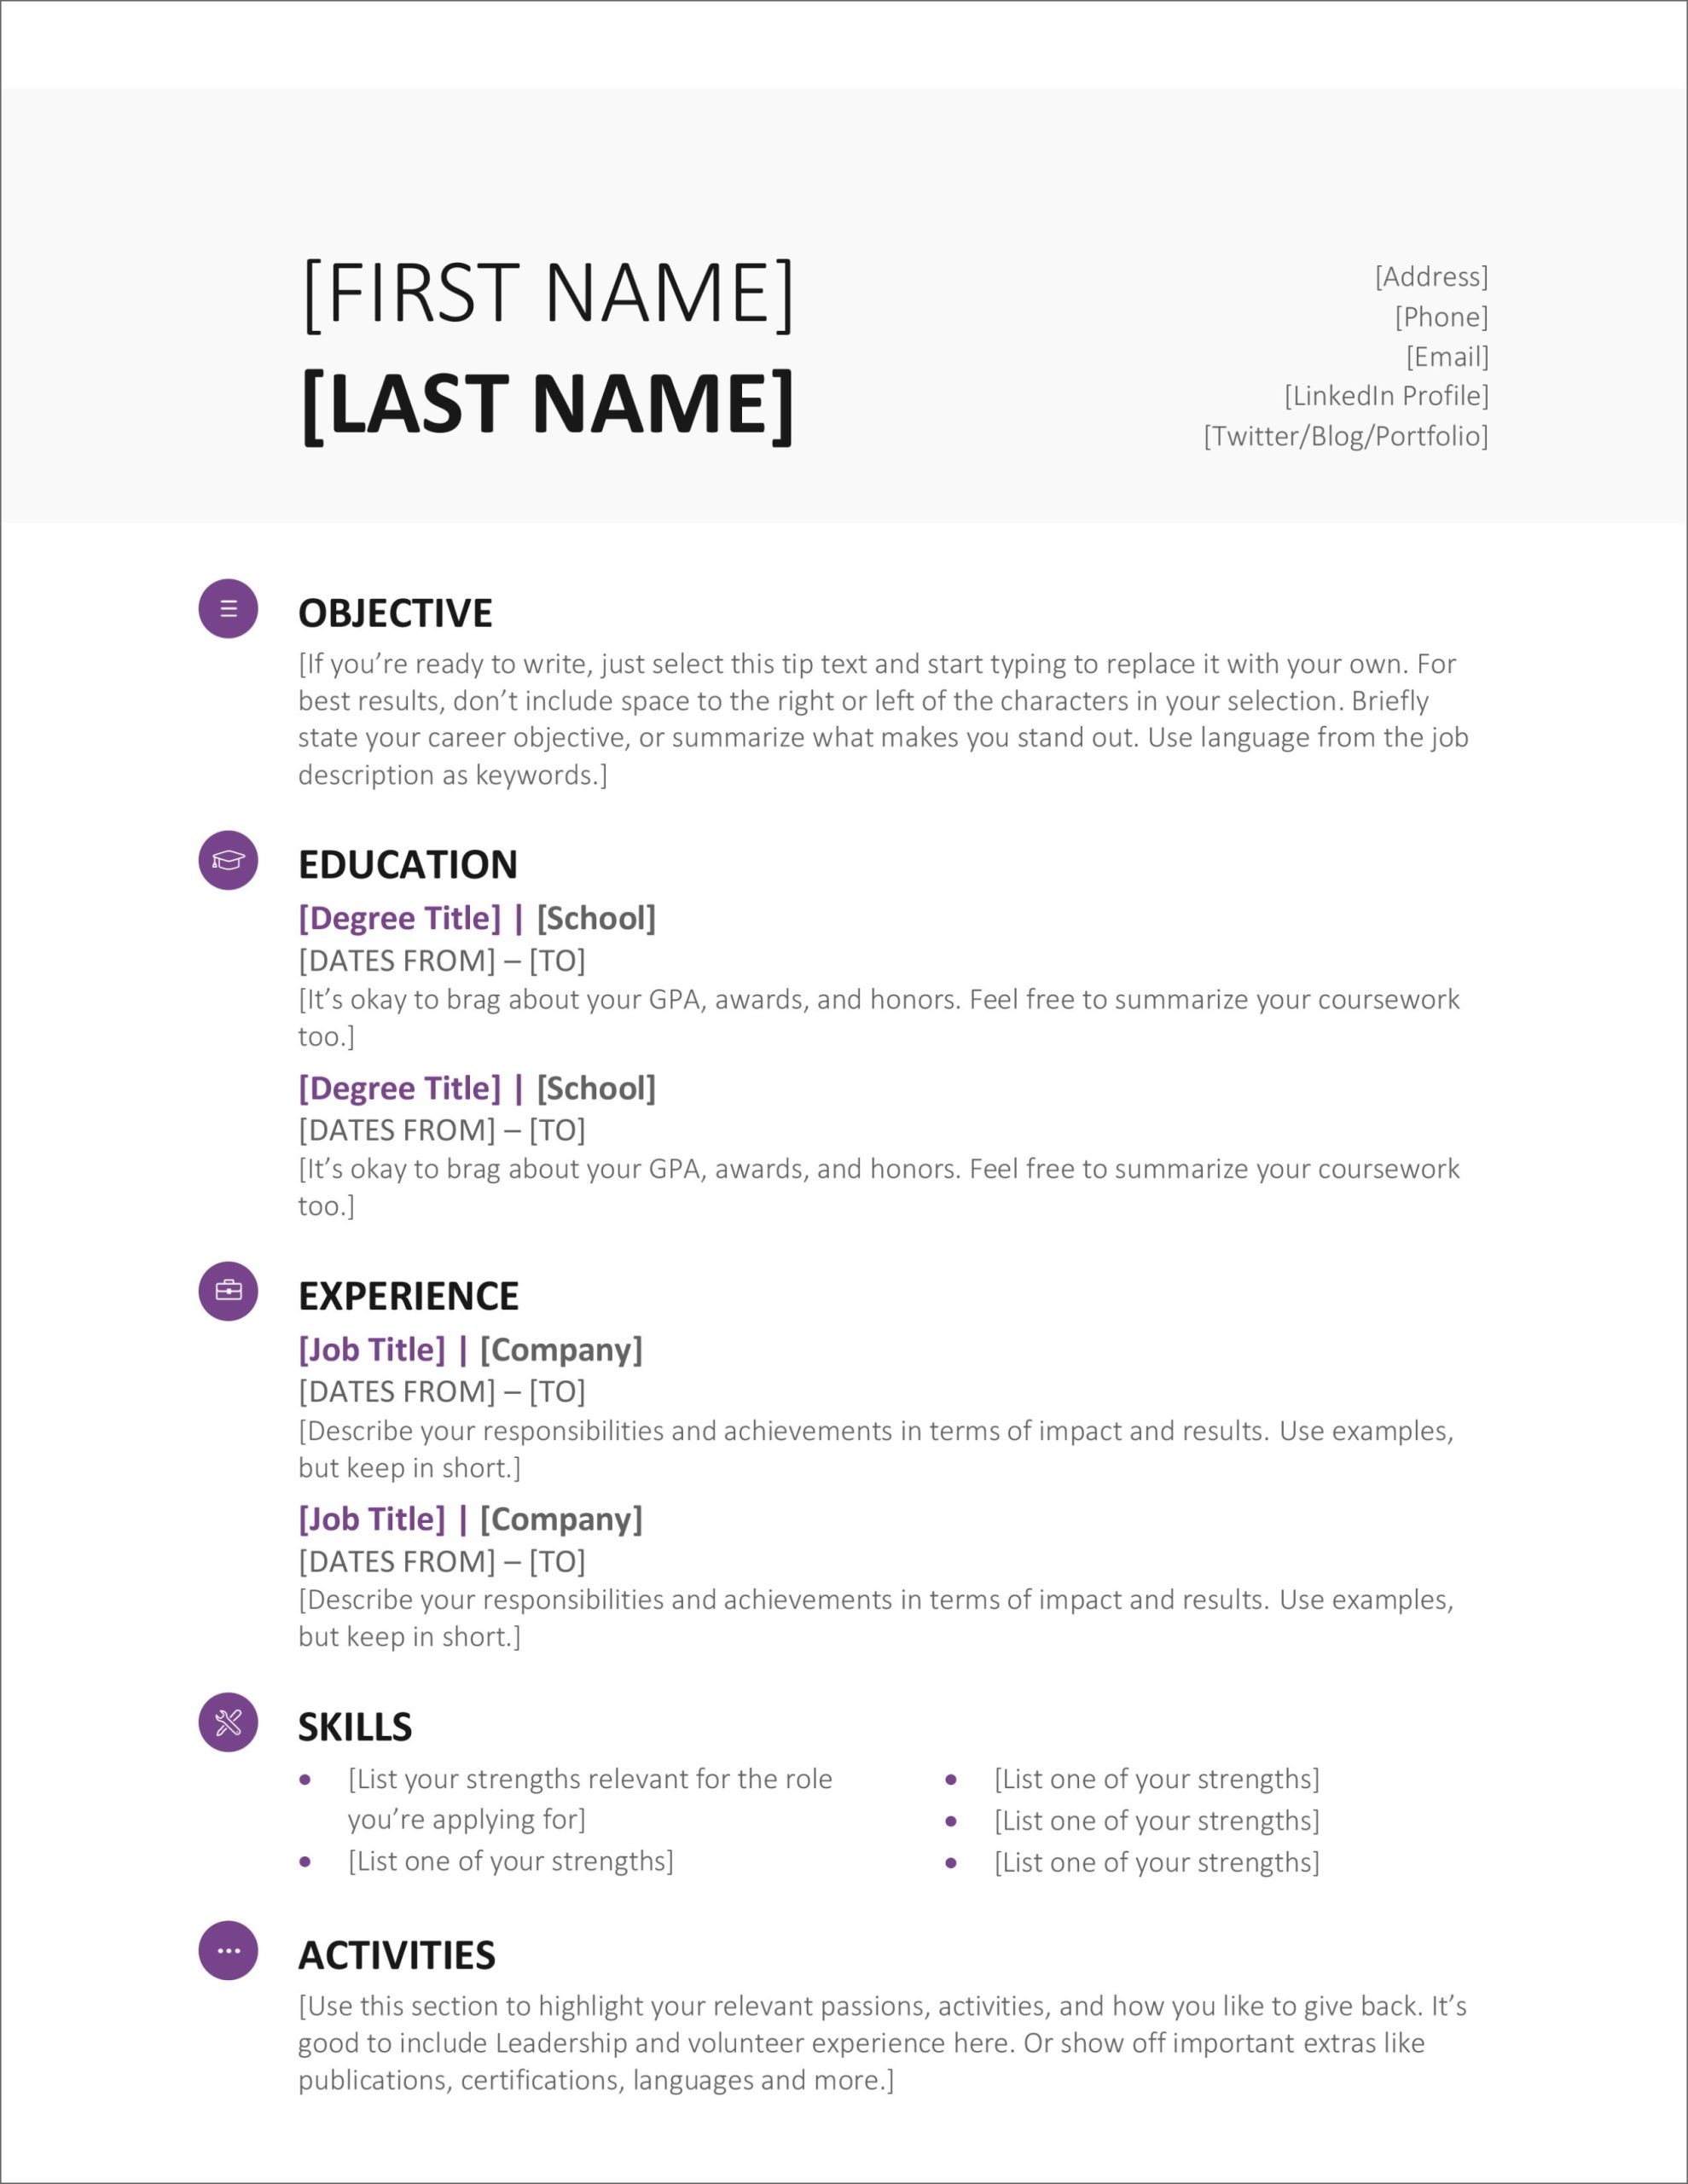 Cv Simple Word / Basic Cv Template 2018 In Microsoft Word  / Classic Cv Template, To Download Regarding How To Find A Resume Template On Word